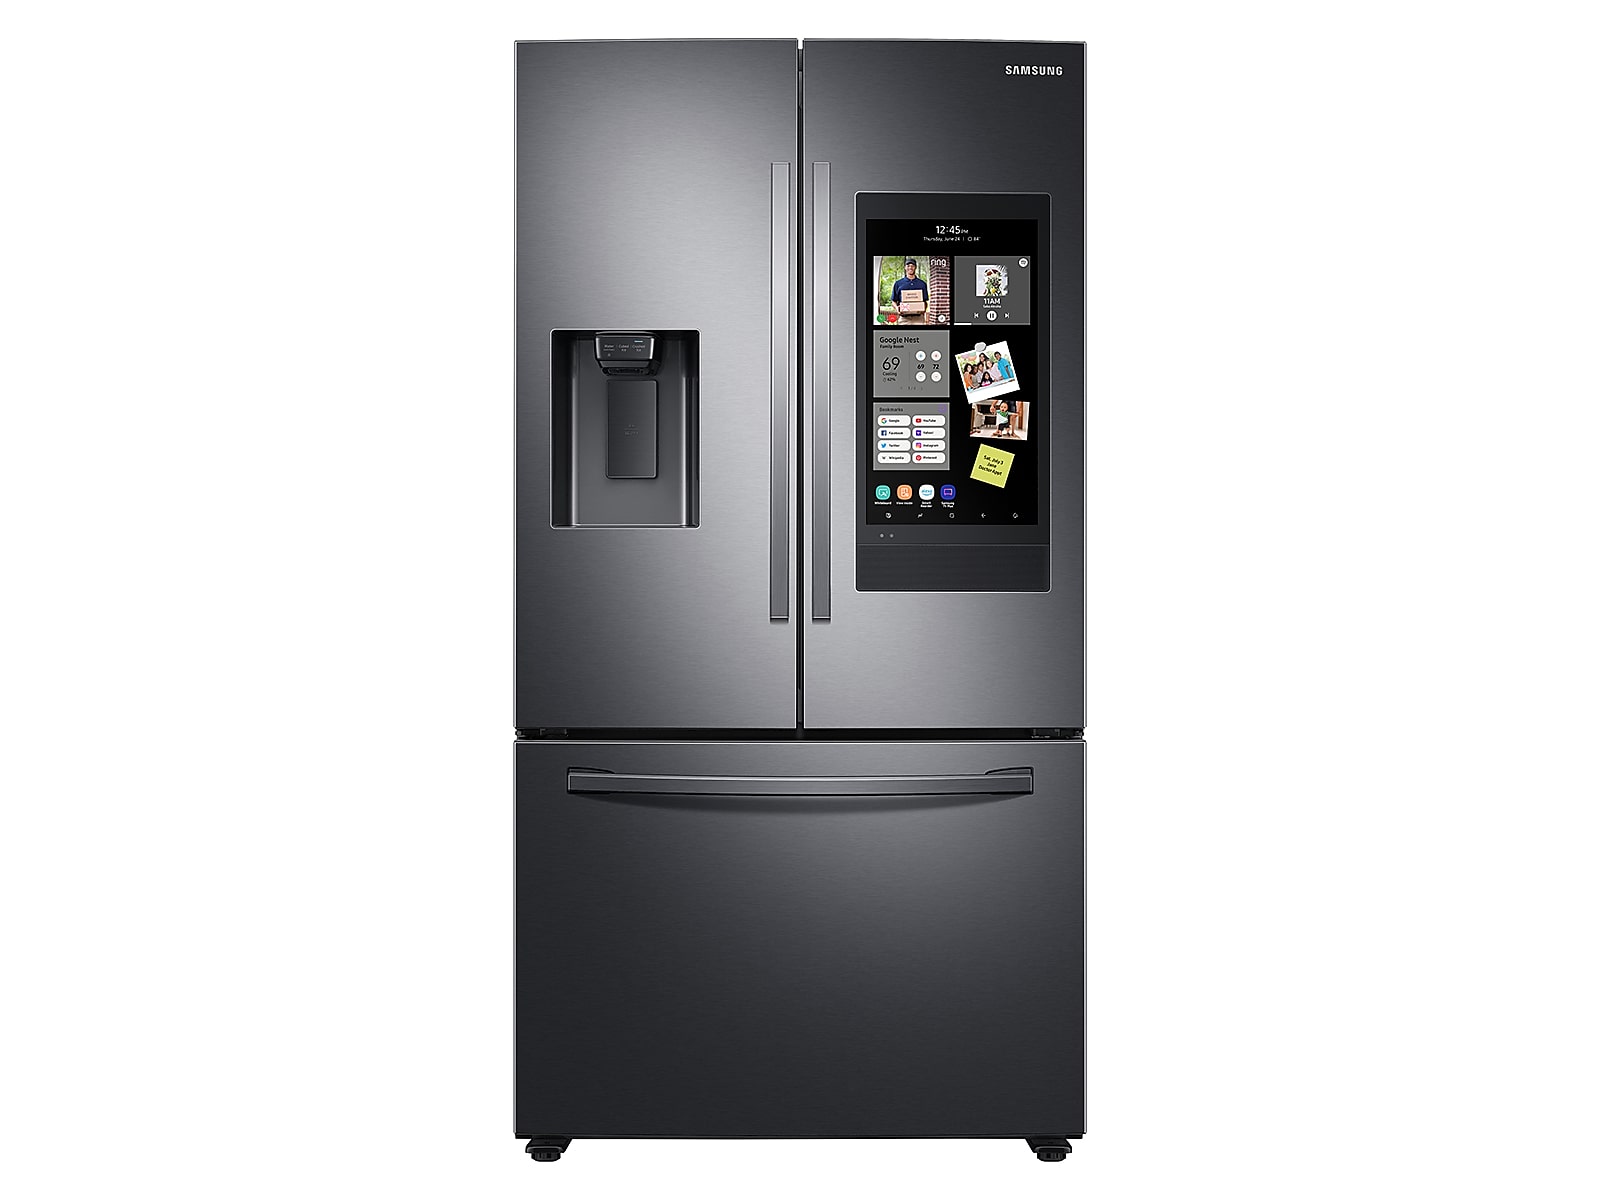 Samsung 26.5 cu. ft. Large Capacity 3-Door French Door Refrigerator with Family Hub™ and External Water & Ice Dispenser in Black Stainless Steel